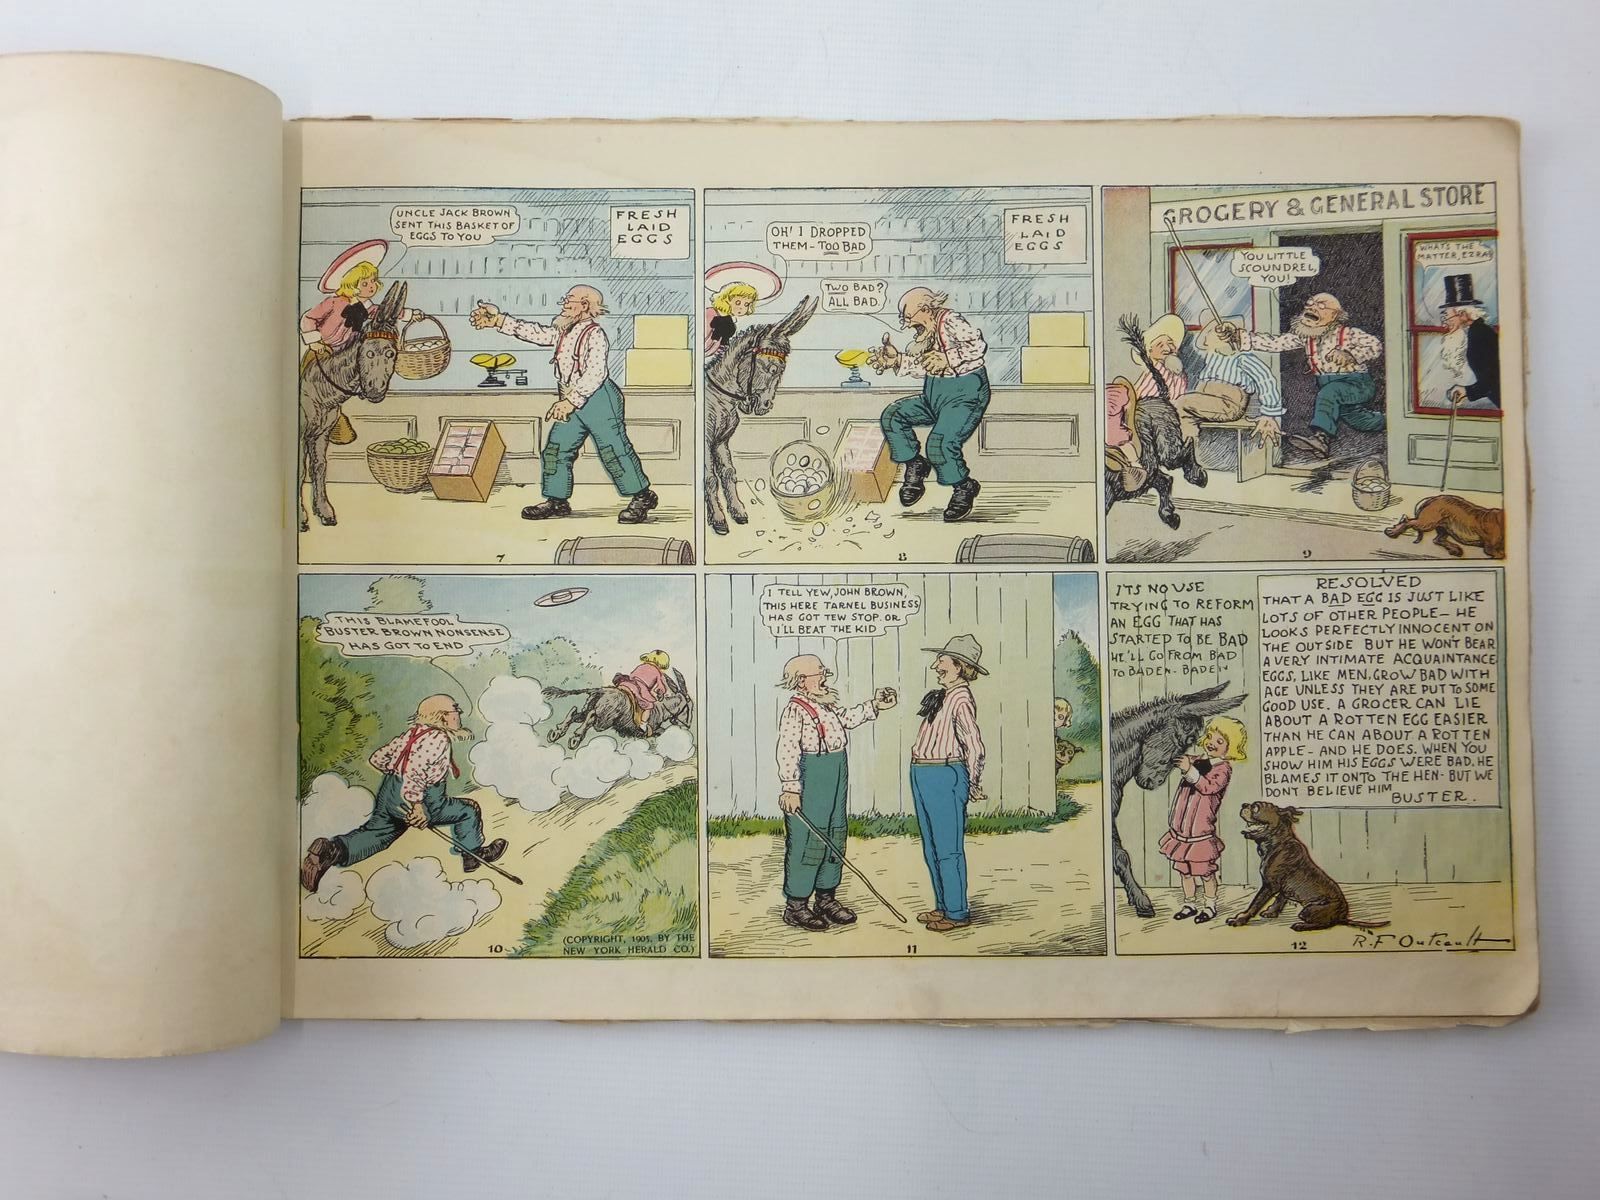 Photo of BUSTER BROWN'S LATEST FROLICS written by Outcault, R.F. illustrated by Outcault, R.F. published by Dean & Son Ltd. (STOCK CODE: 2123848)  for sale by Stella & Rose's Books